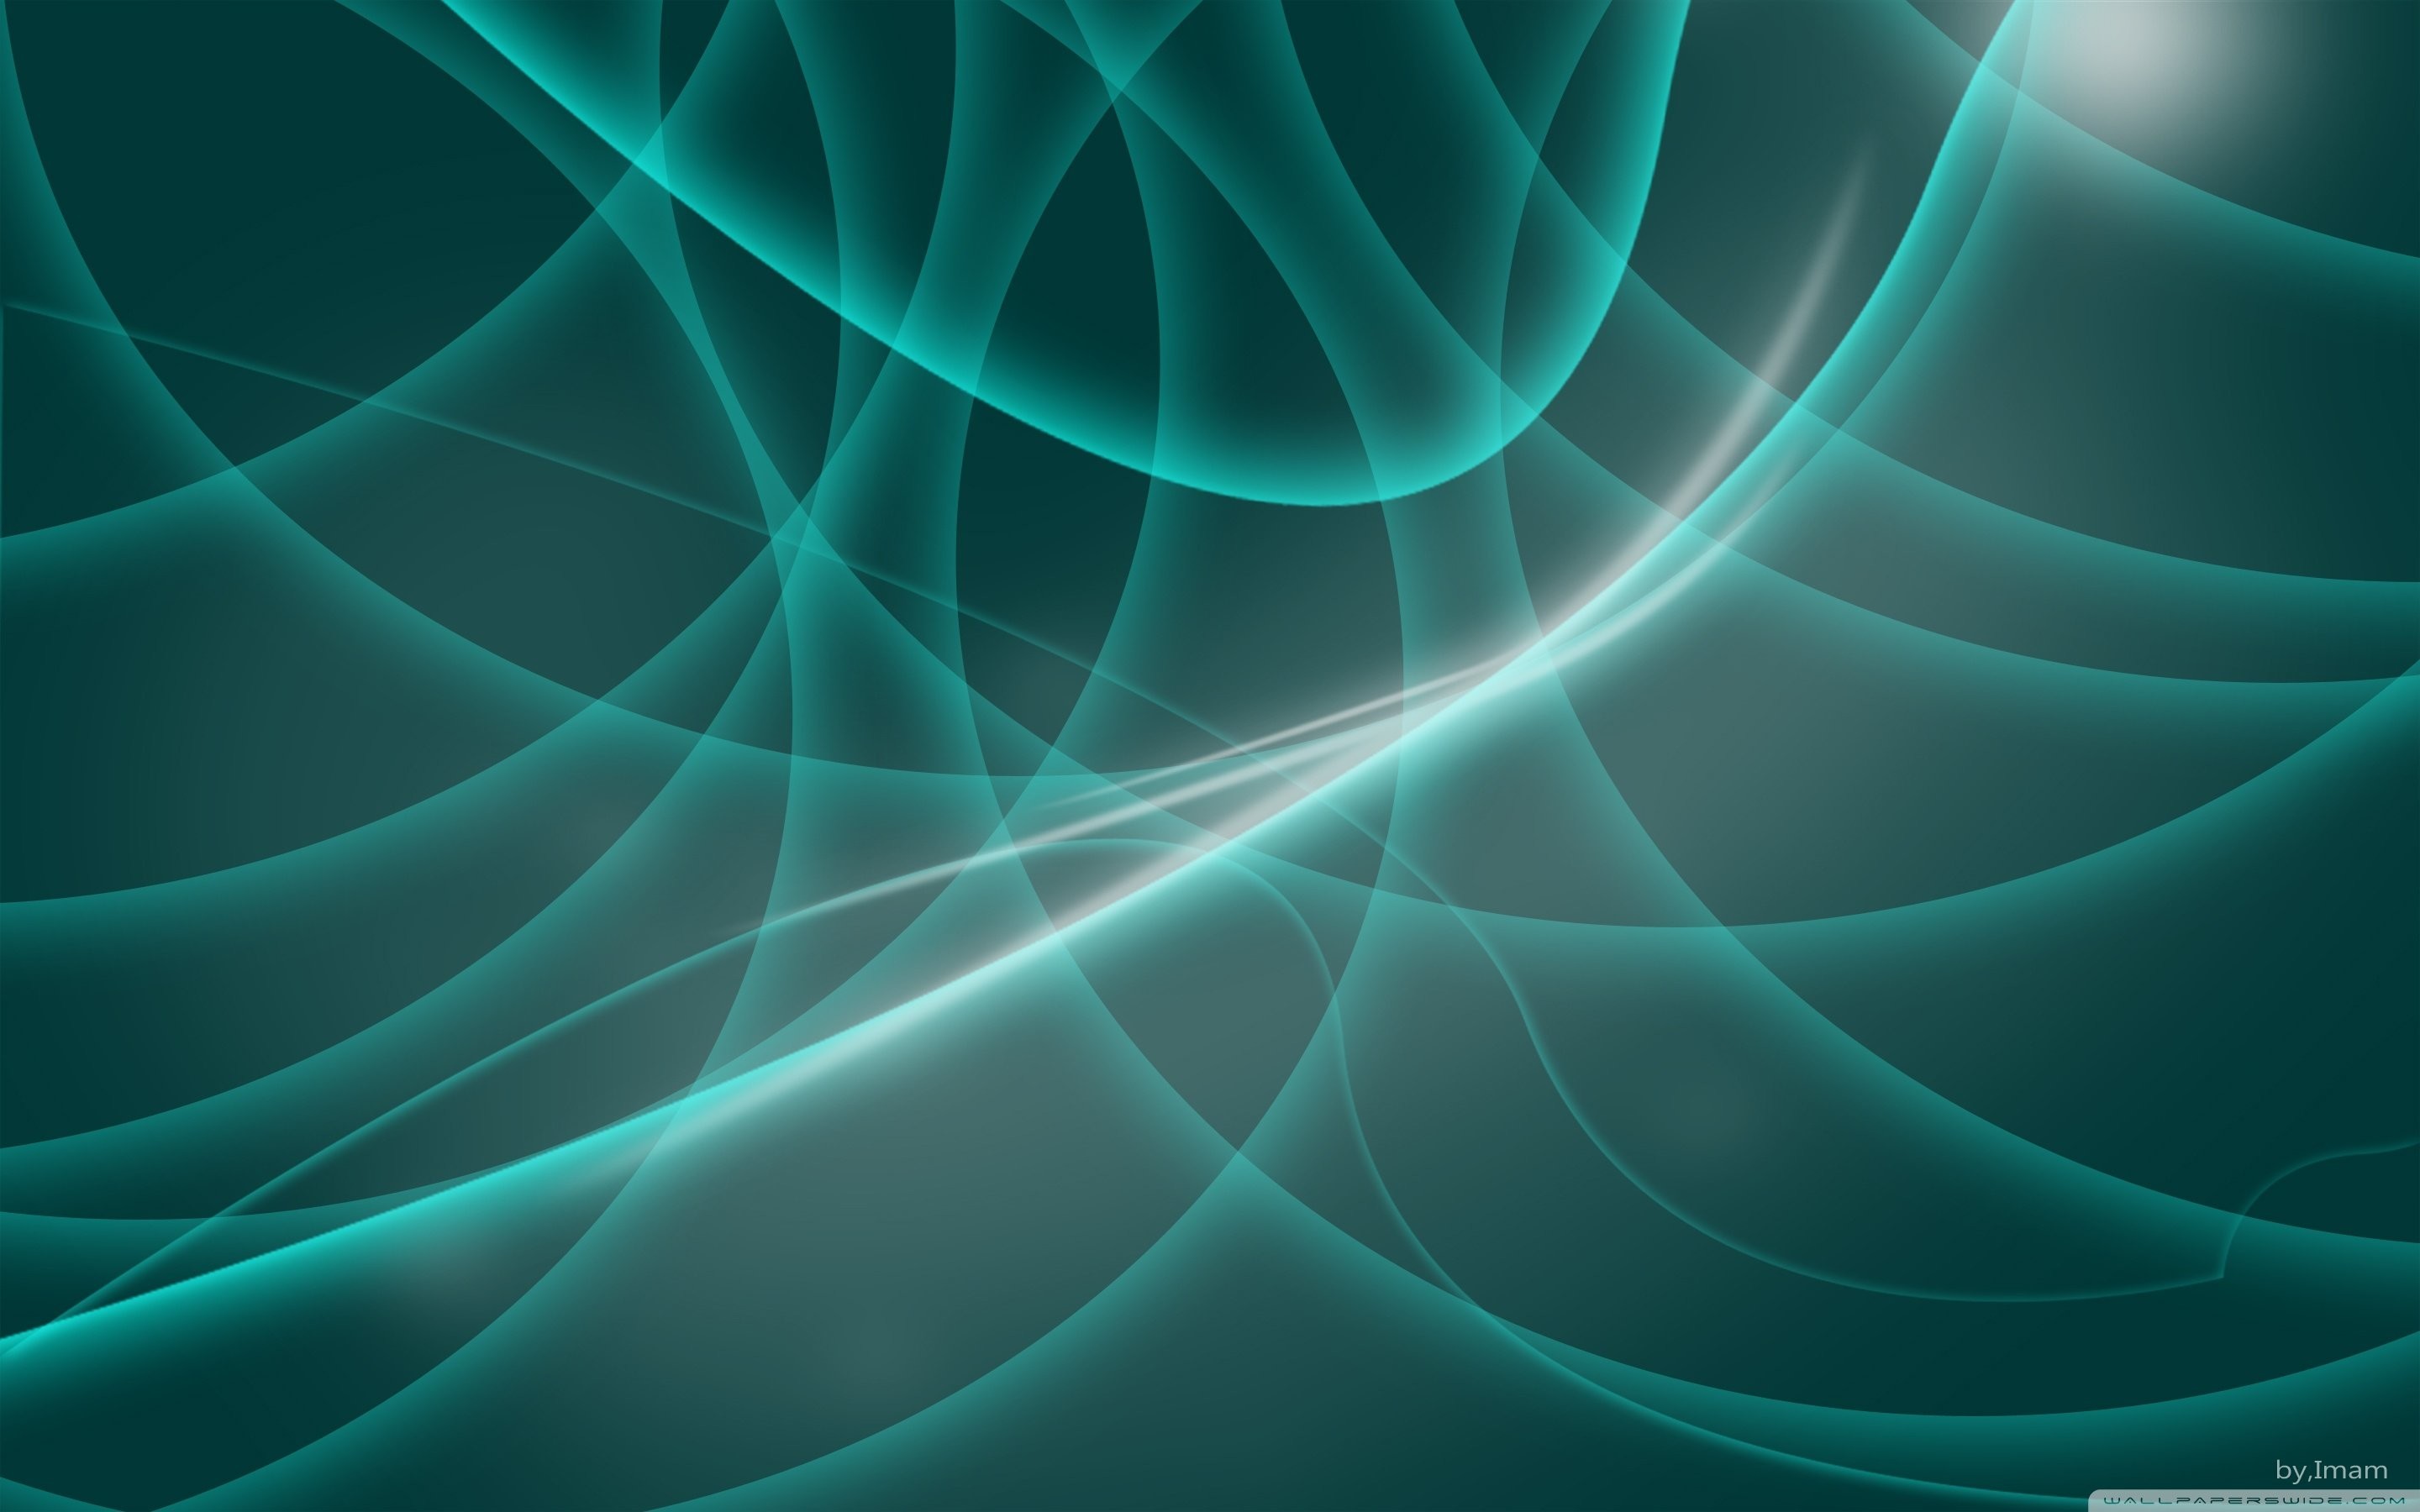 Teal Abstract Wallpaper, HD Teal Abstract Background on WallpaperBat